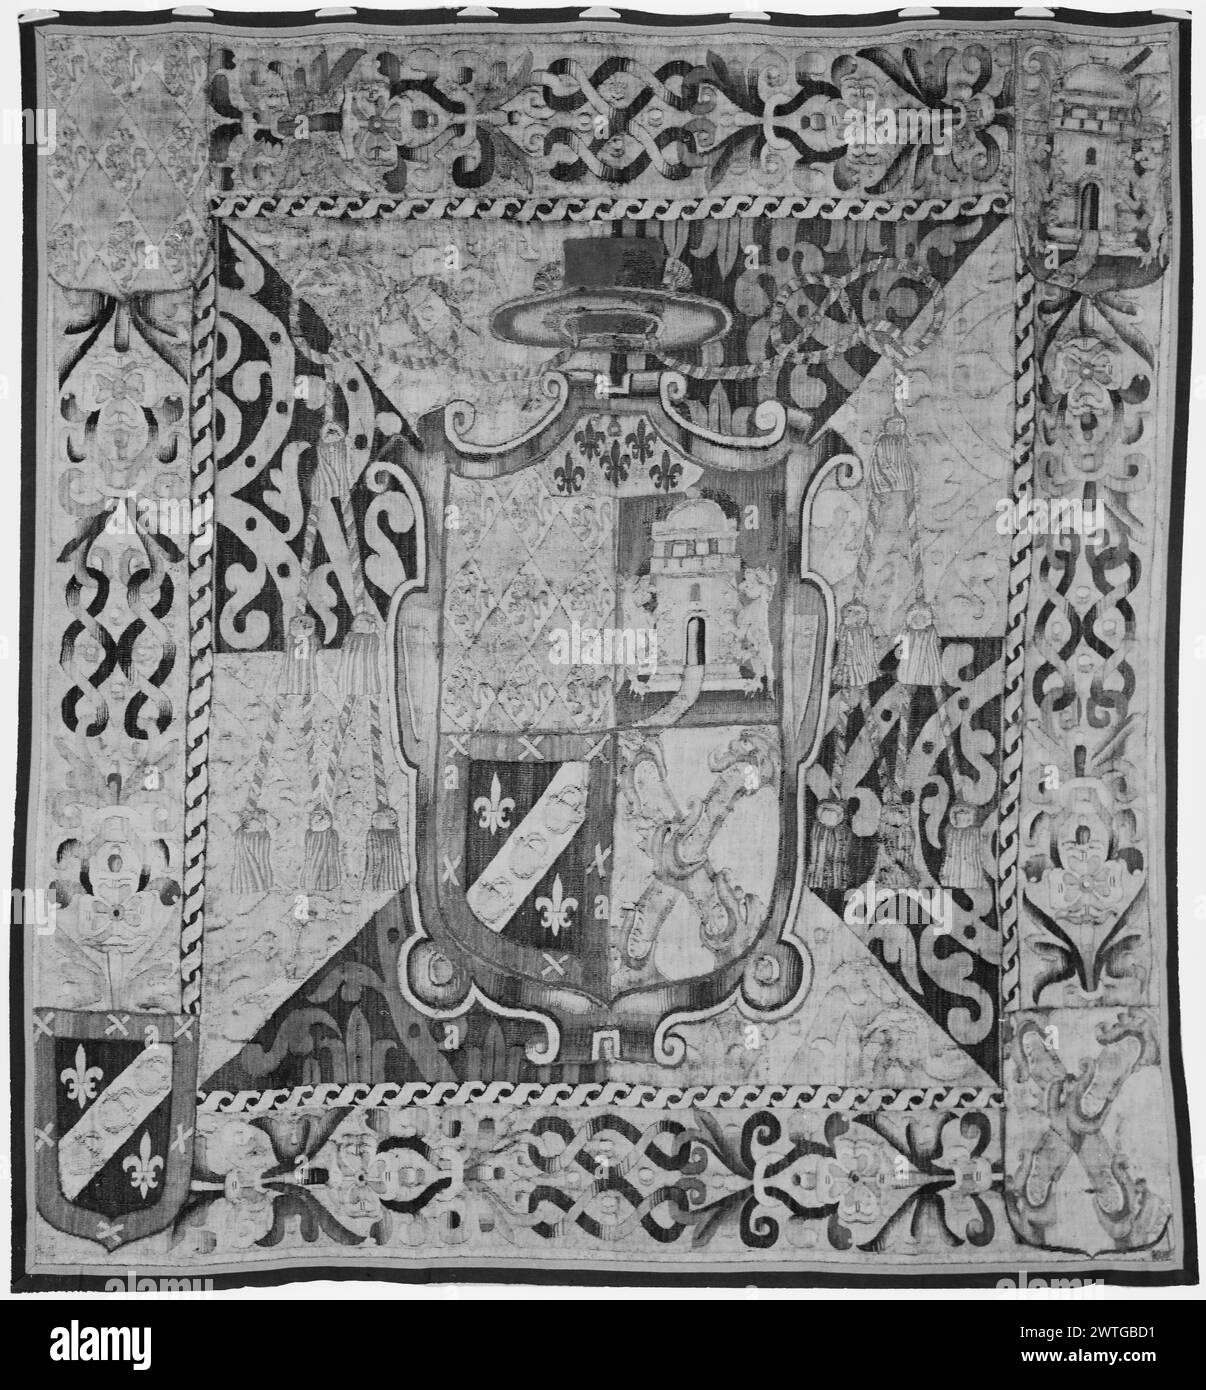 Quartered coat of arms of a bishop. unknown c. 1550-1600 Tapestry Dimensions: H 8'4' x W 7'10' Tapestry Materials/Techniques: unknown Culture: Flemish Weaving Center: unknown Ownership History: French & Co. Coat of arms in strapwork cartouche on patterned field with 8 triangular compartments (BRD) ribbon interlace with floral terminals; coats of arms in corners Curtain. The stock sheet does not indicate from whom tapestry was received from nor to whom it was sold to. French & Co. stock sheet in archive, D-50 Stock Photo